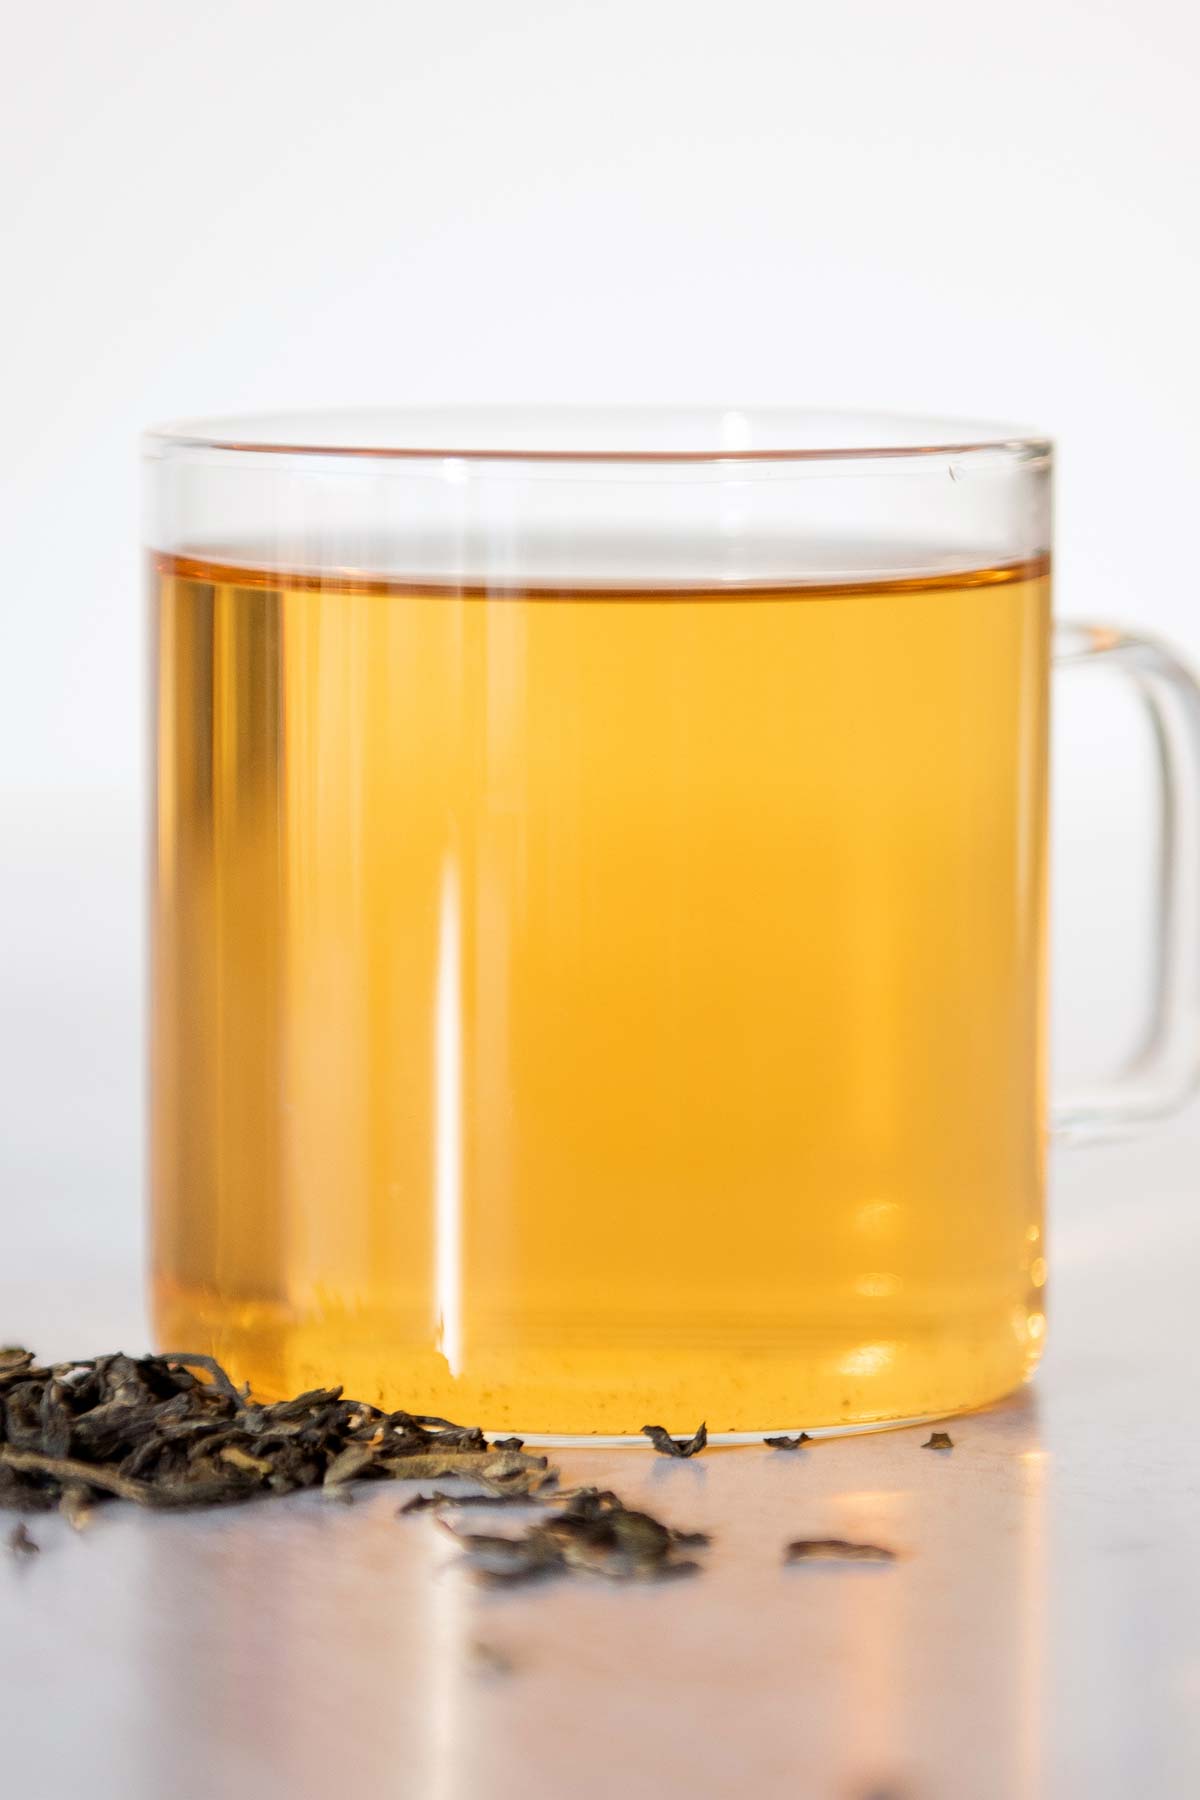 Jasmine Tea: Health Benefits, Side Effect, and How to Brew Properly - Oh, How Civilized